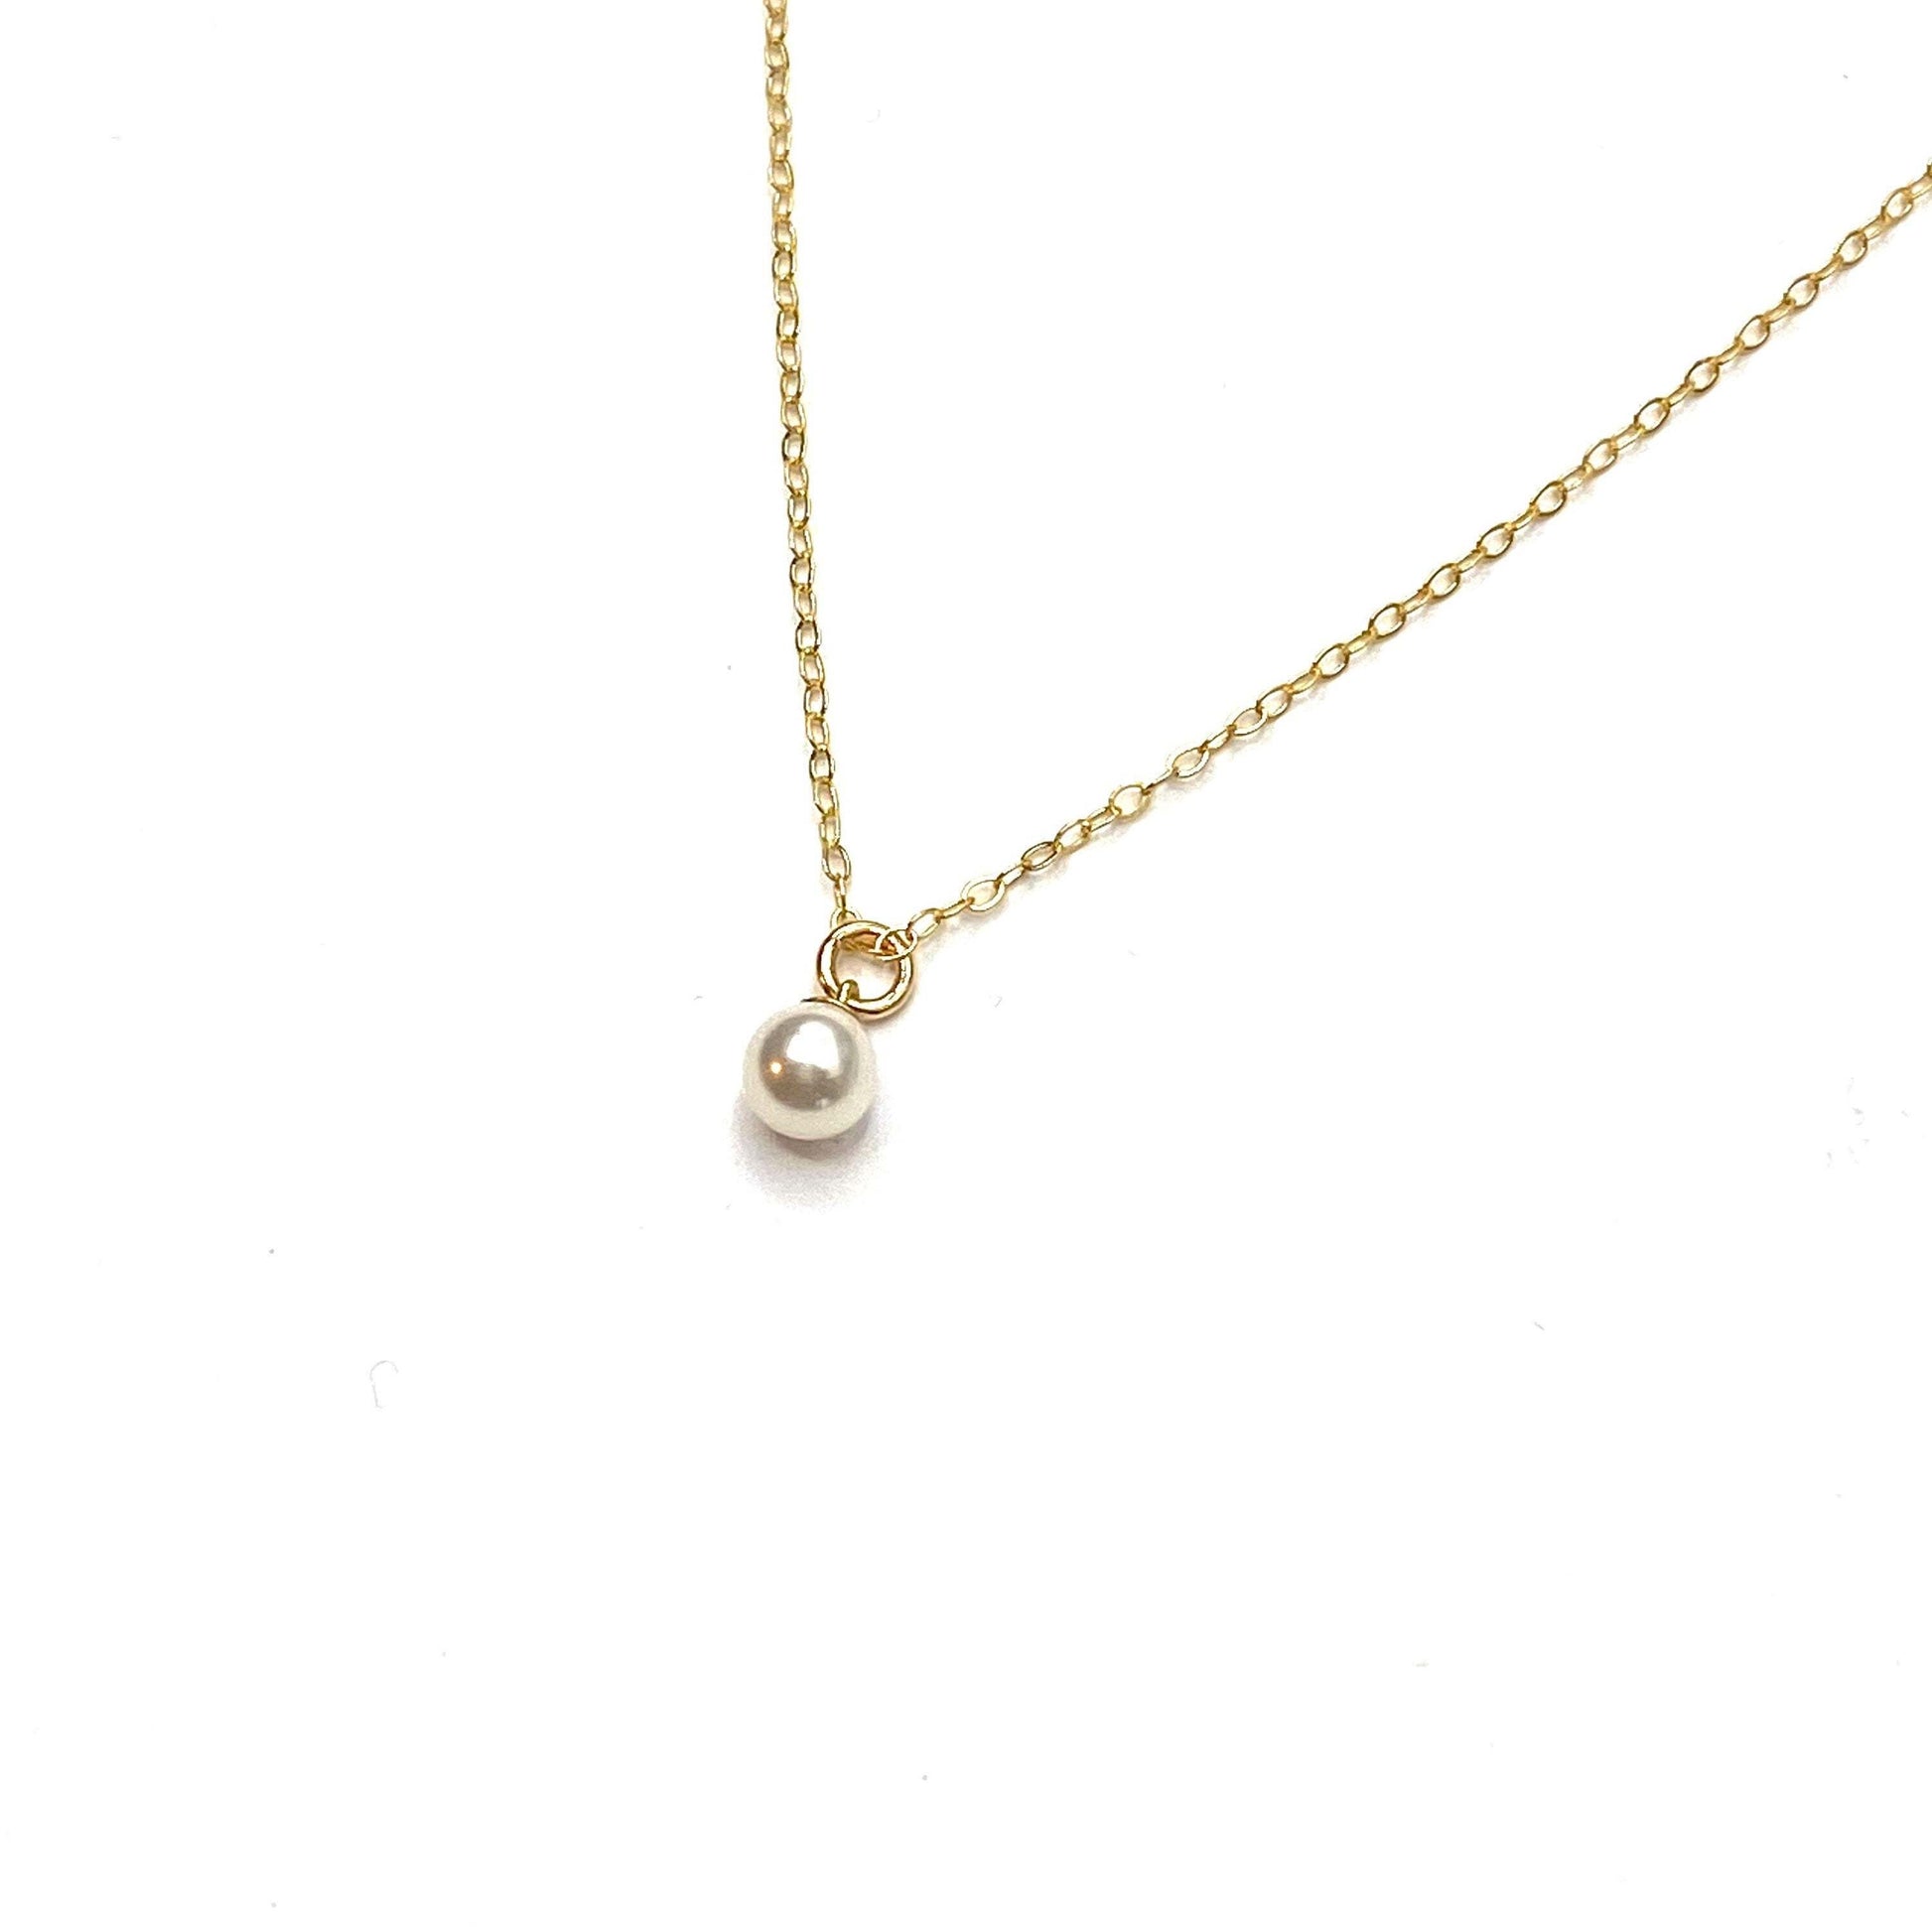 dainty pearl necklace pearl necklace layered necklace  layered necklace set pearl chain gold layered necklace  pearl pendant necklace   gold pearl necklace